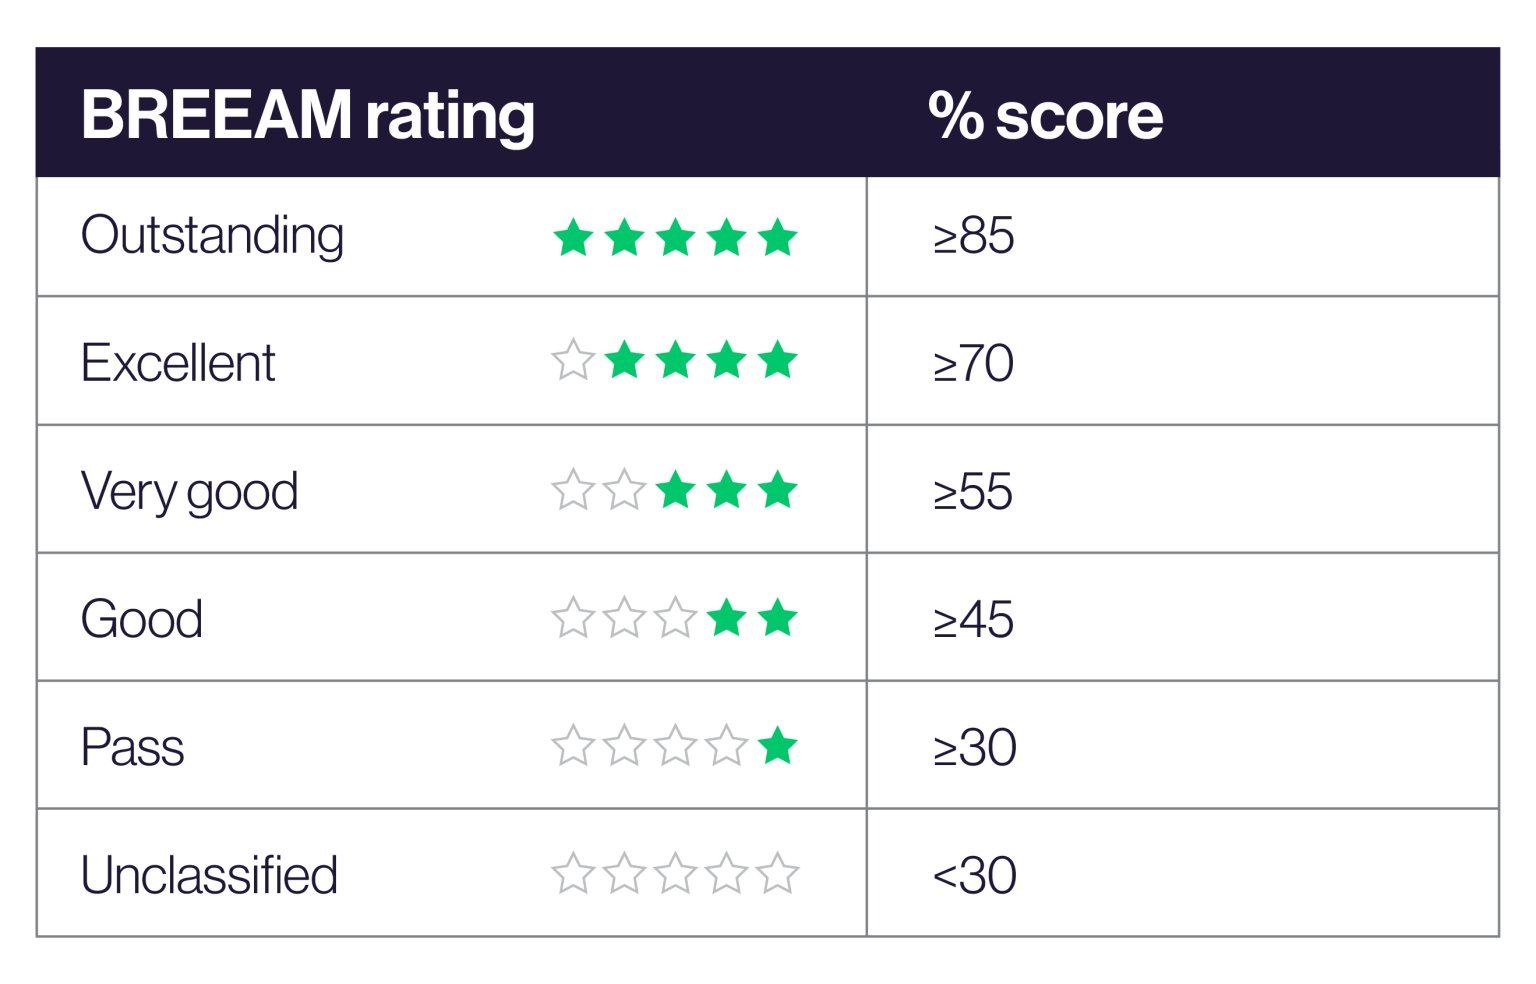 BREEAM ratings from lowest Unclassified to highest Outstanding and their percentage score